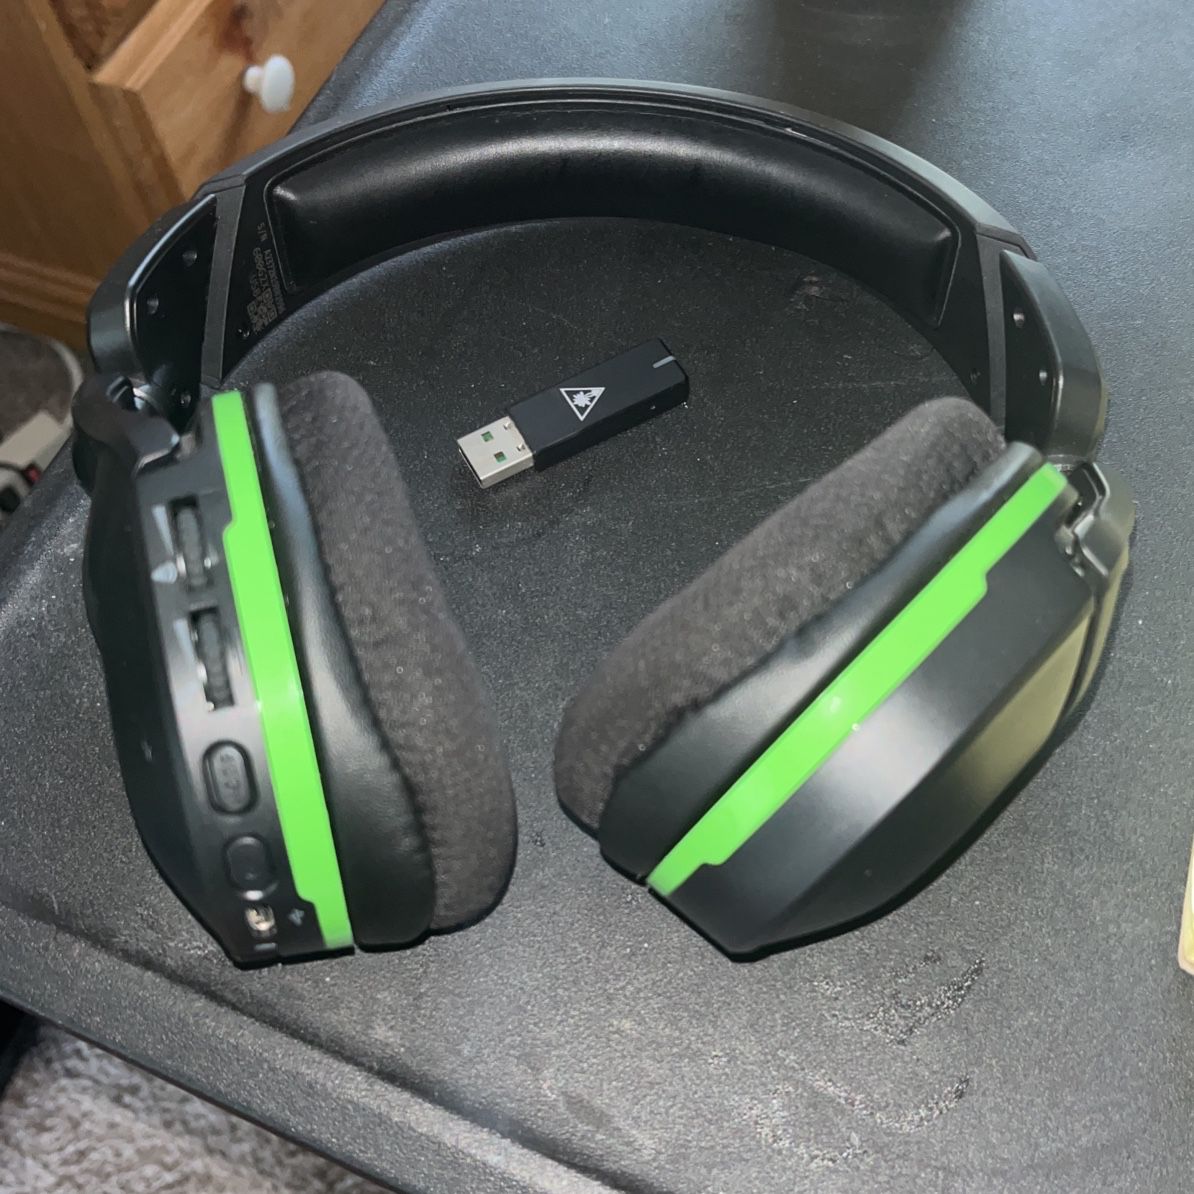 Turtle Beach Bluetooth For Xbox One 